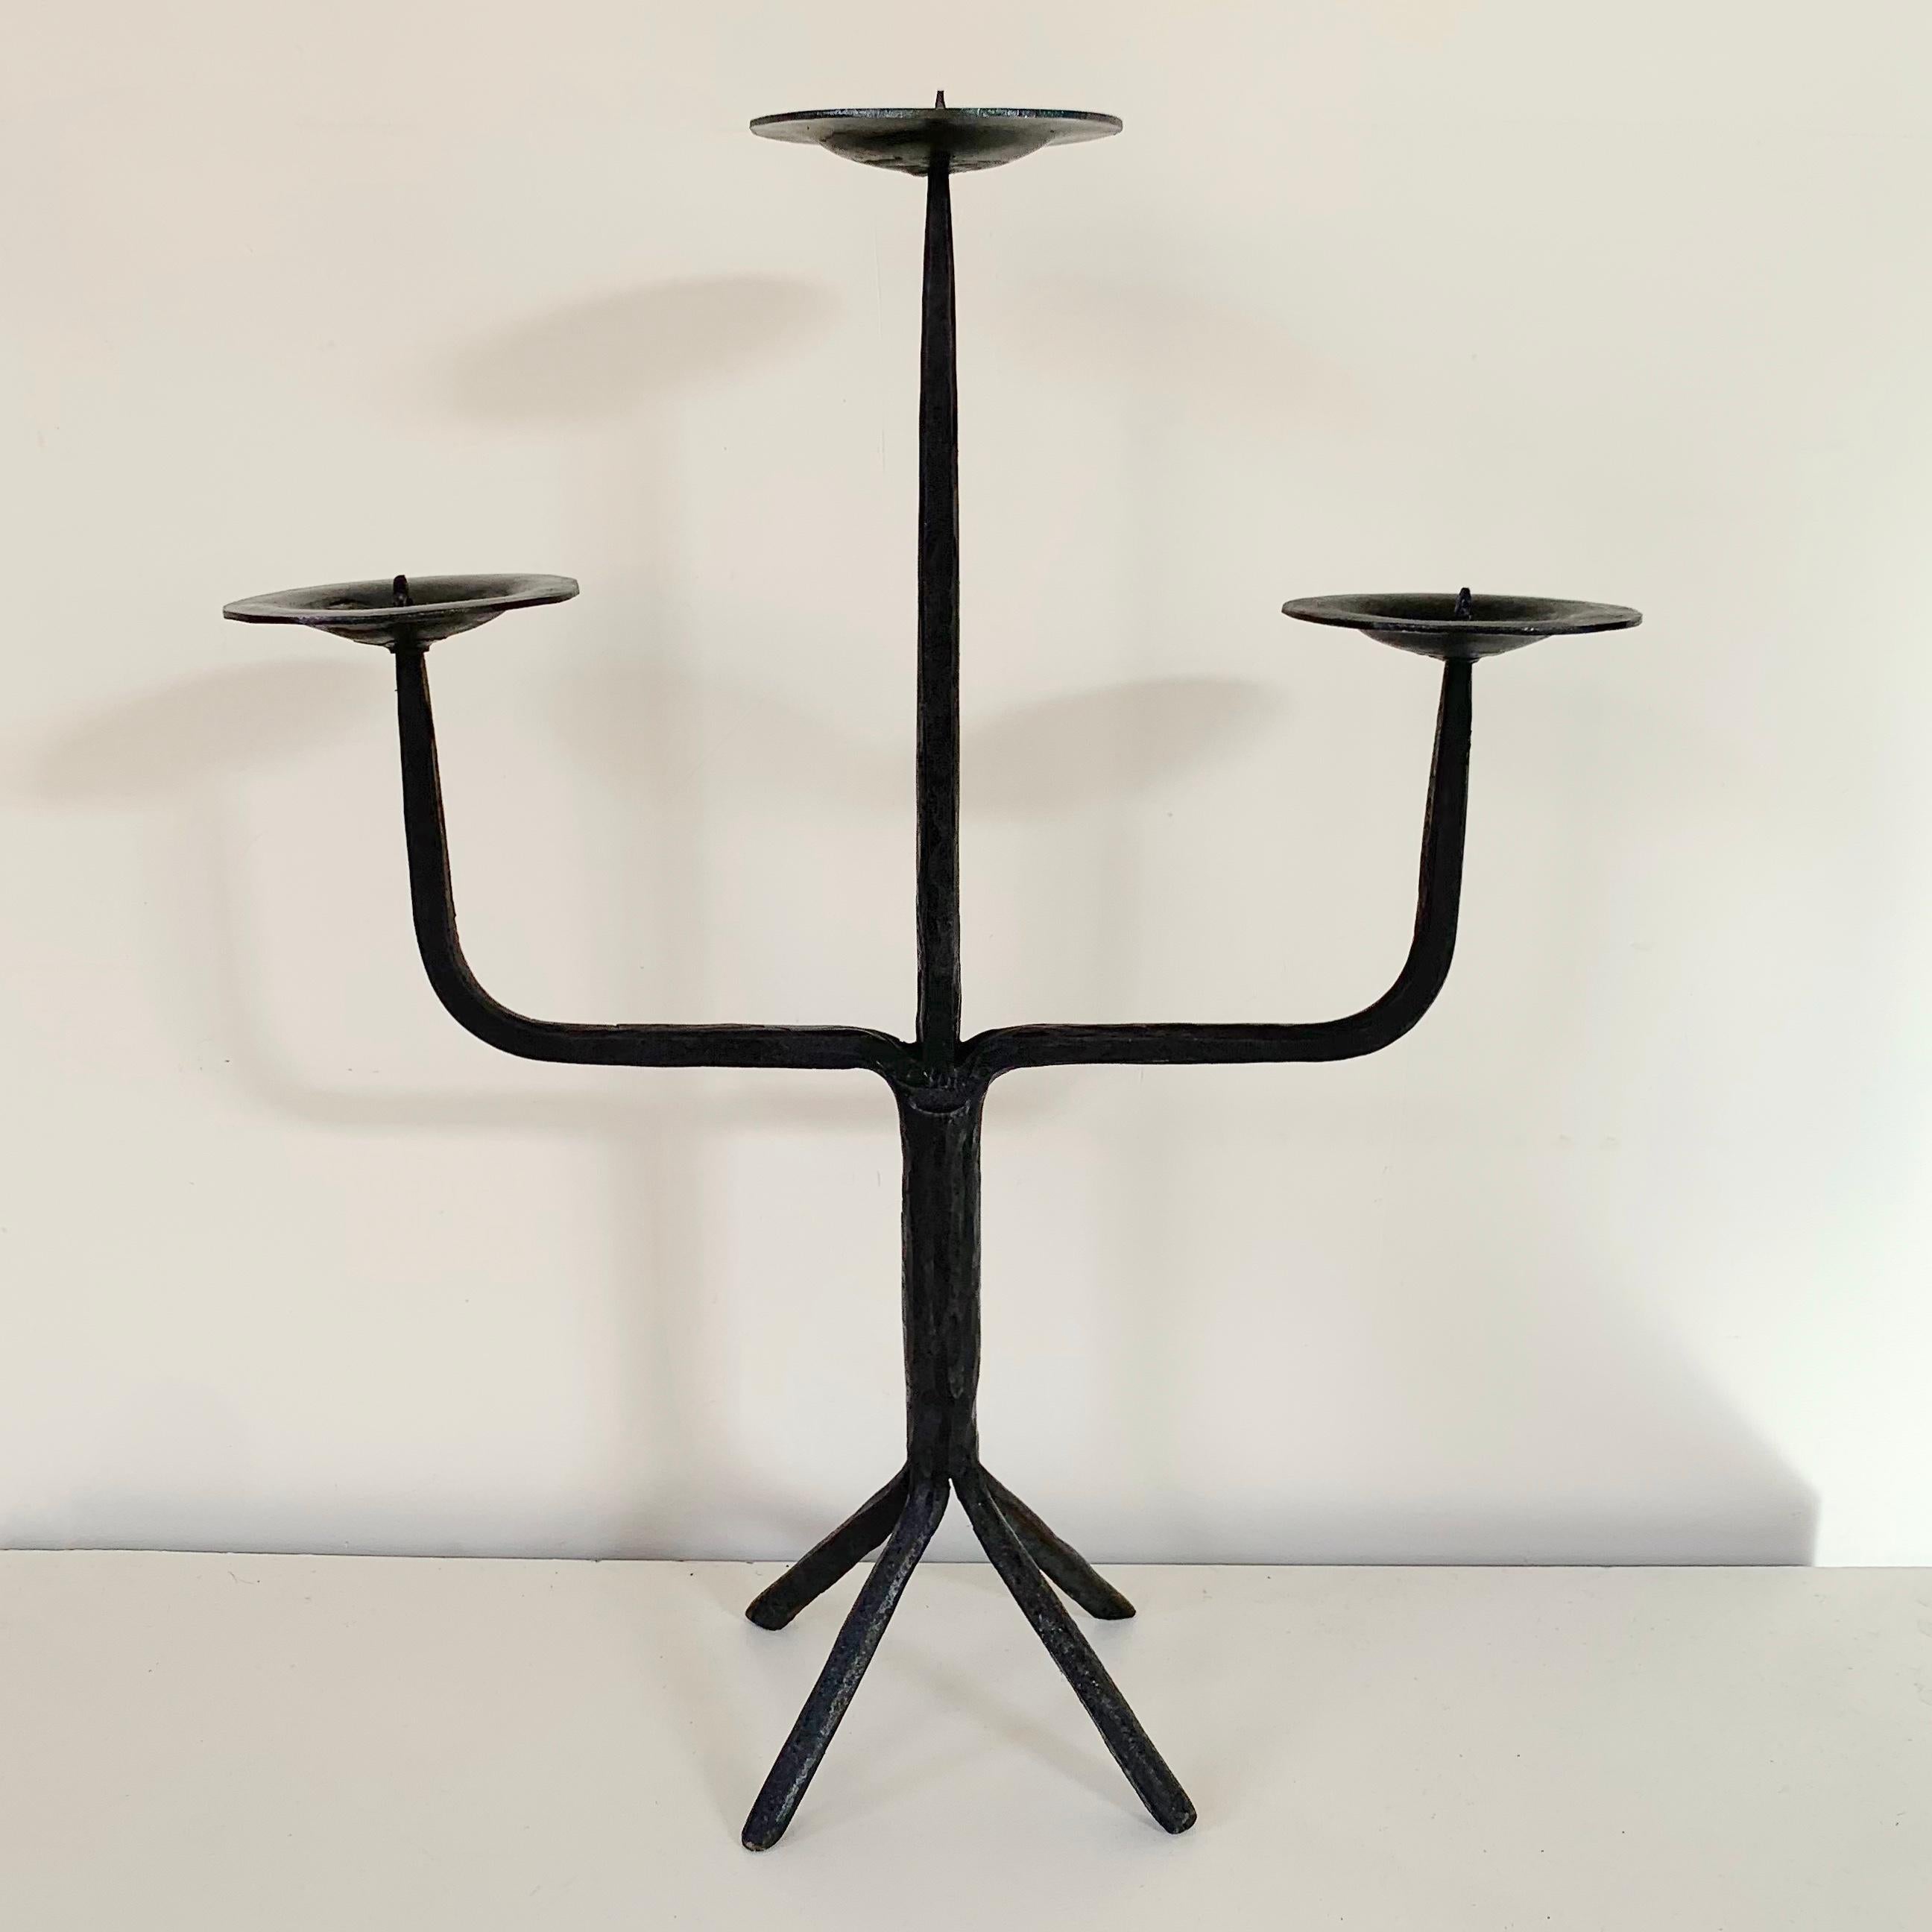 Elegant candlestick in the style of Atelier de Marolles, circa 1950, France.
Blackened wrought iron.
Dimensions: 41 cm H, 32 cm W, 11 cm D.
Good original condition.
All purchases are covered by our Buyer Protection Guarantee.
This item can be